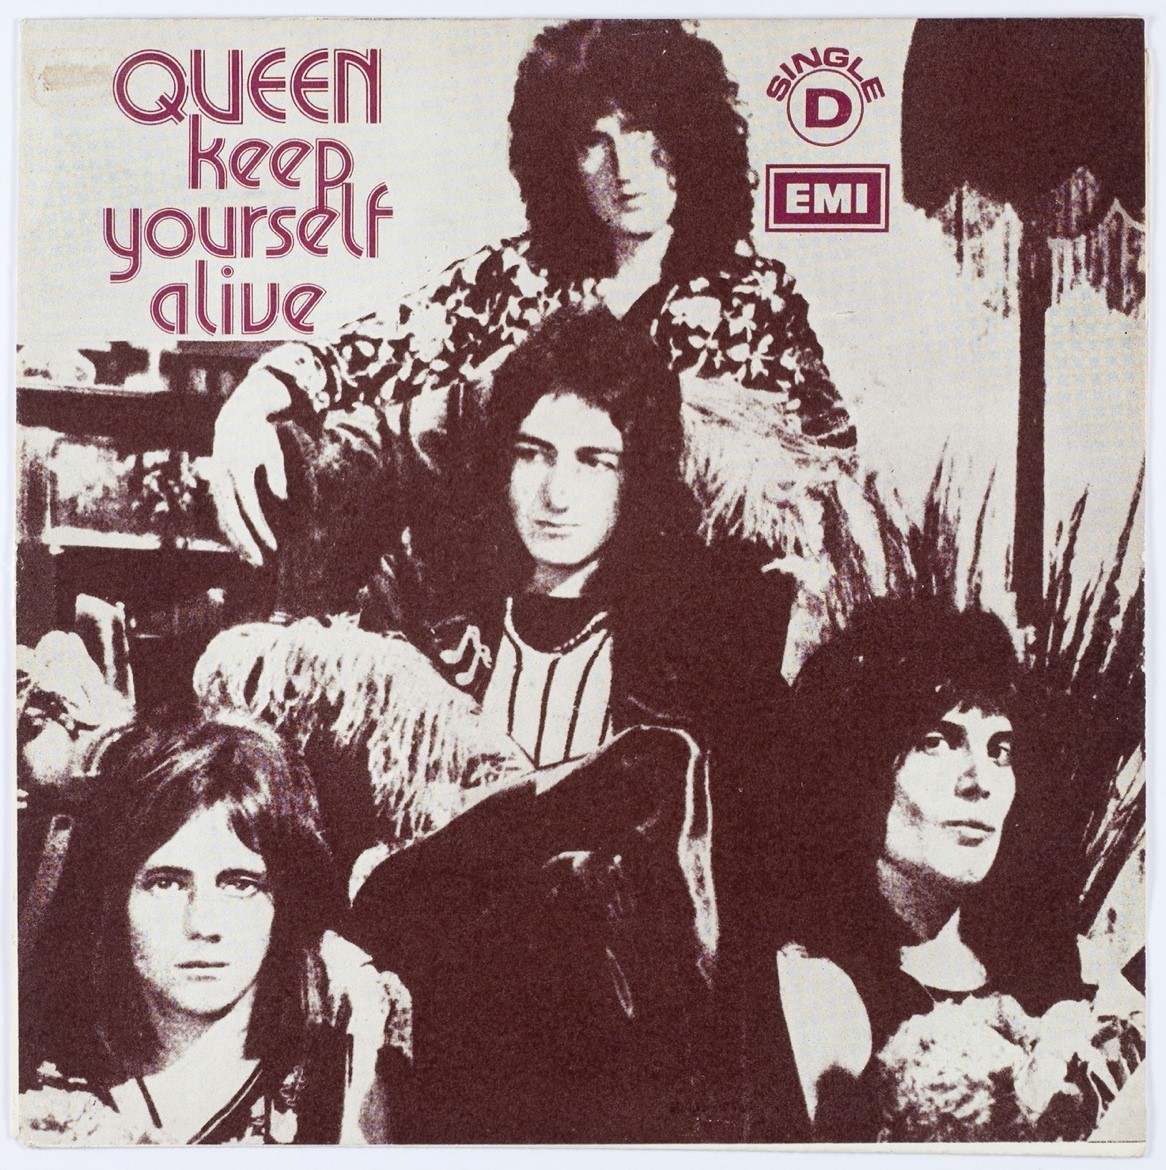 Queen The Greatest - Episode 1. “Keep Yourself Alive” OUT NOW!